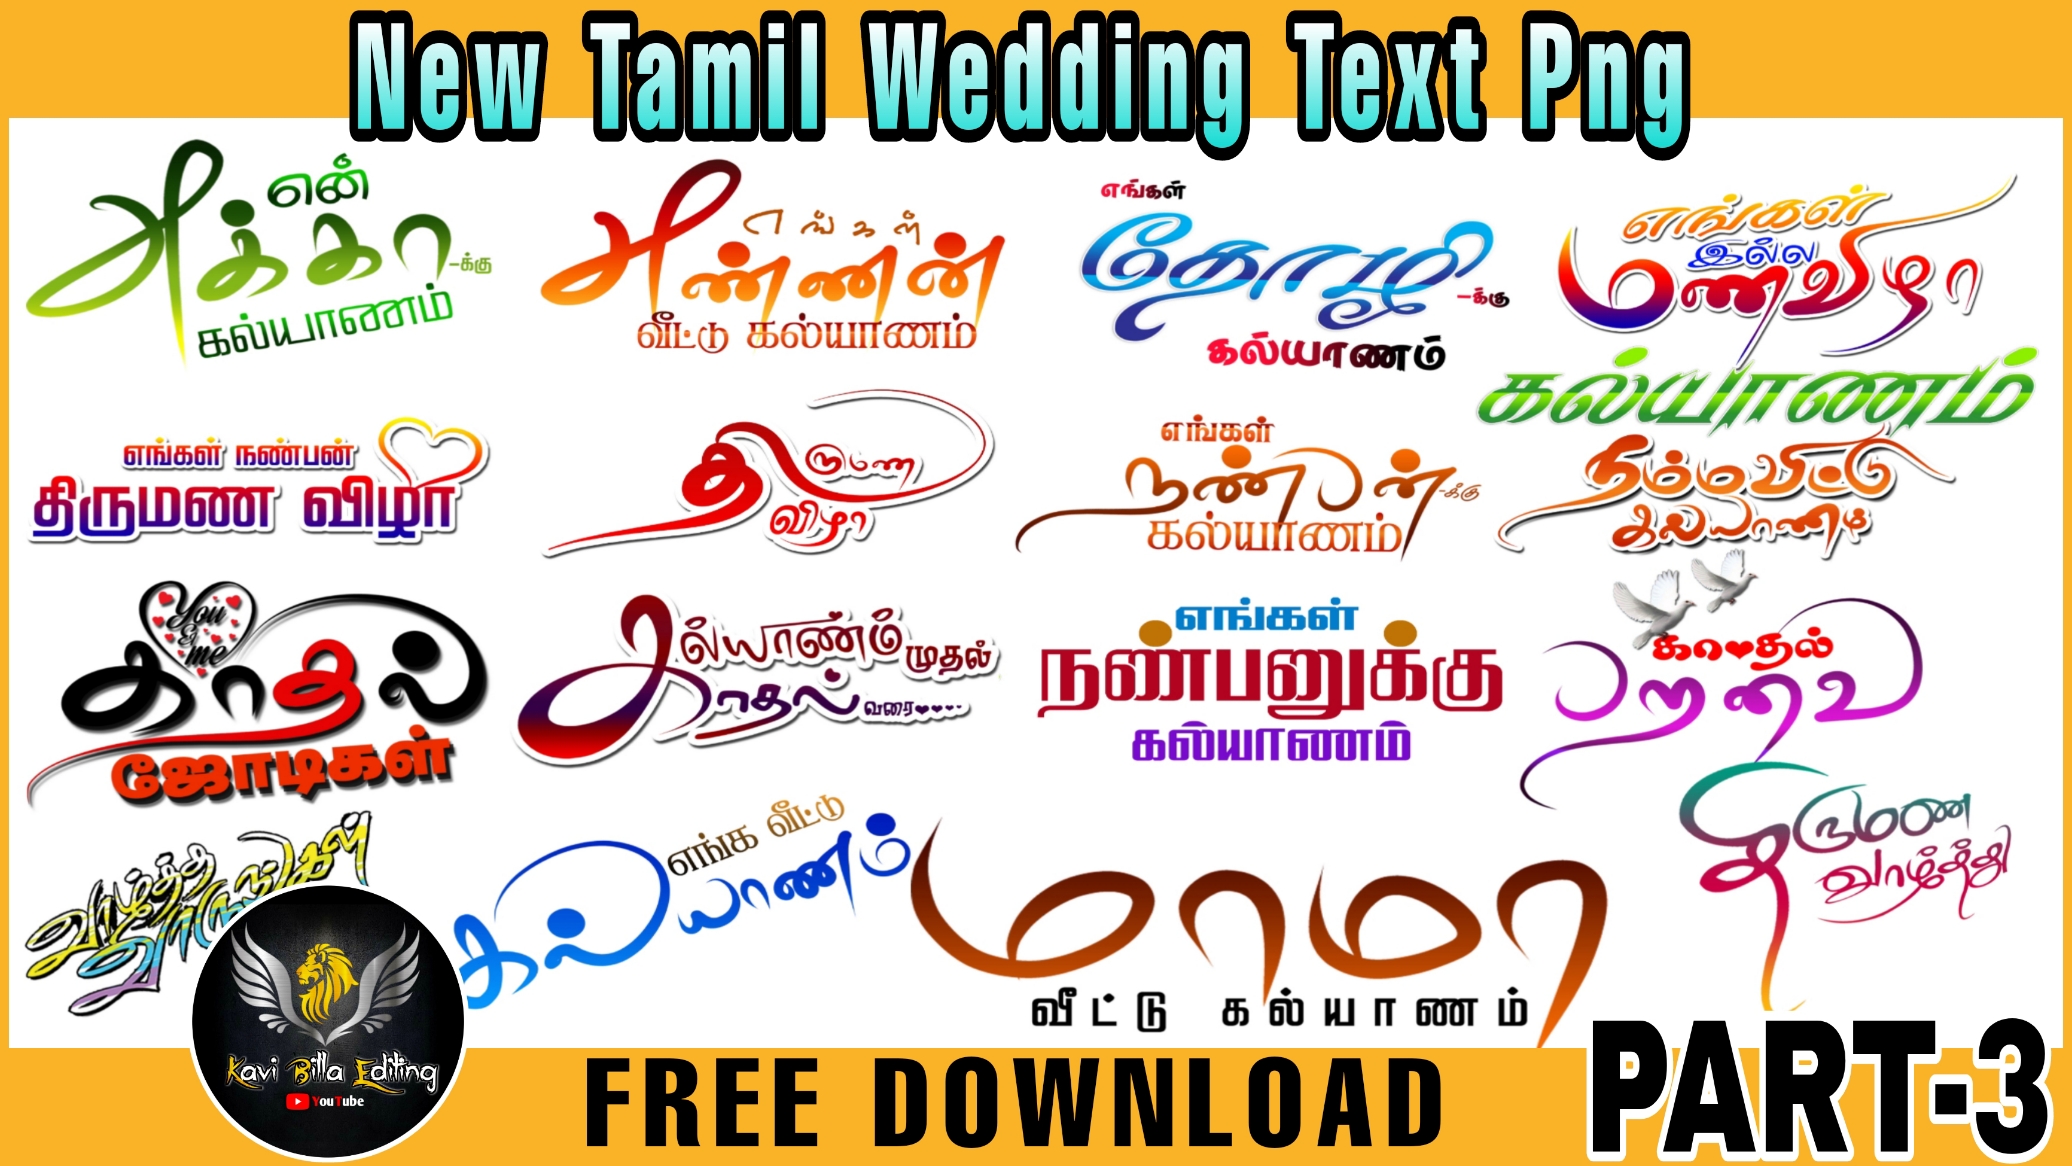 Tamil wedding text png